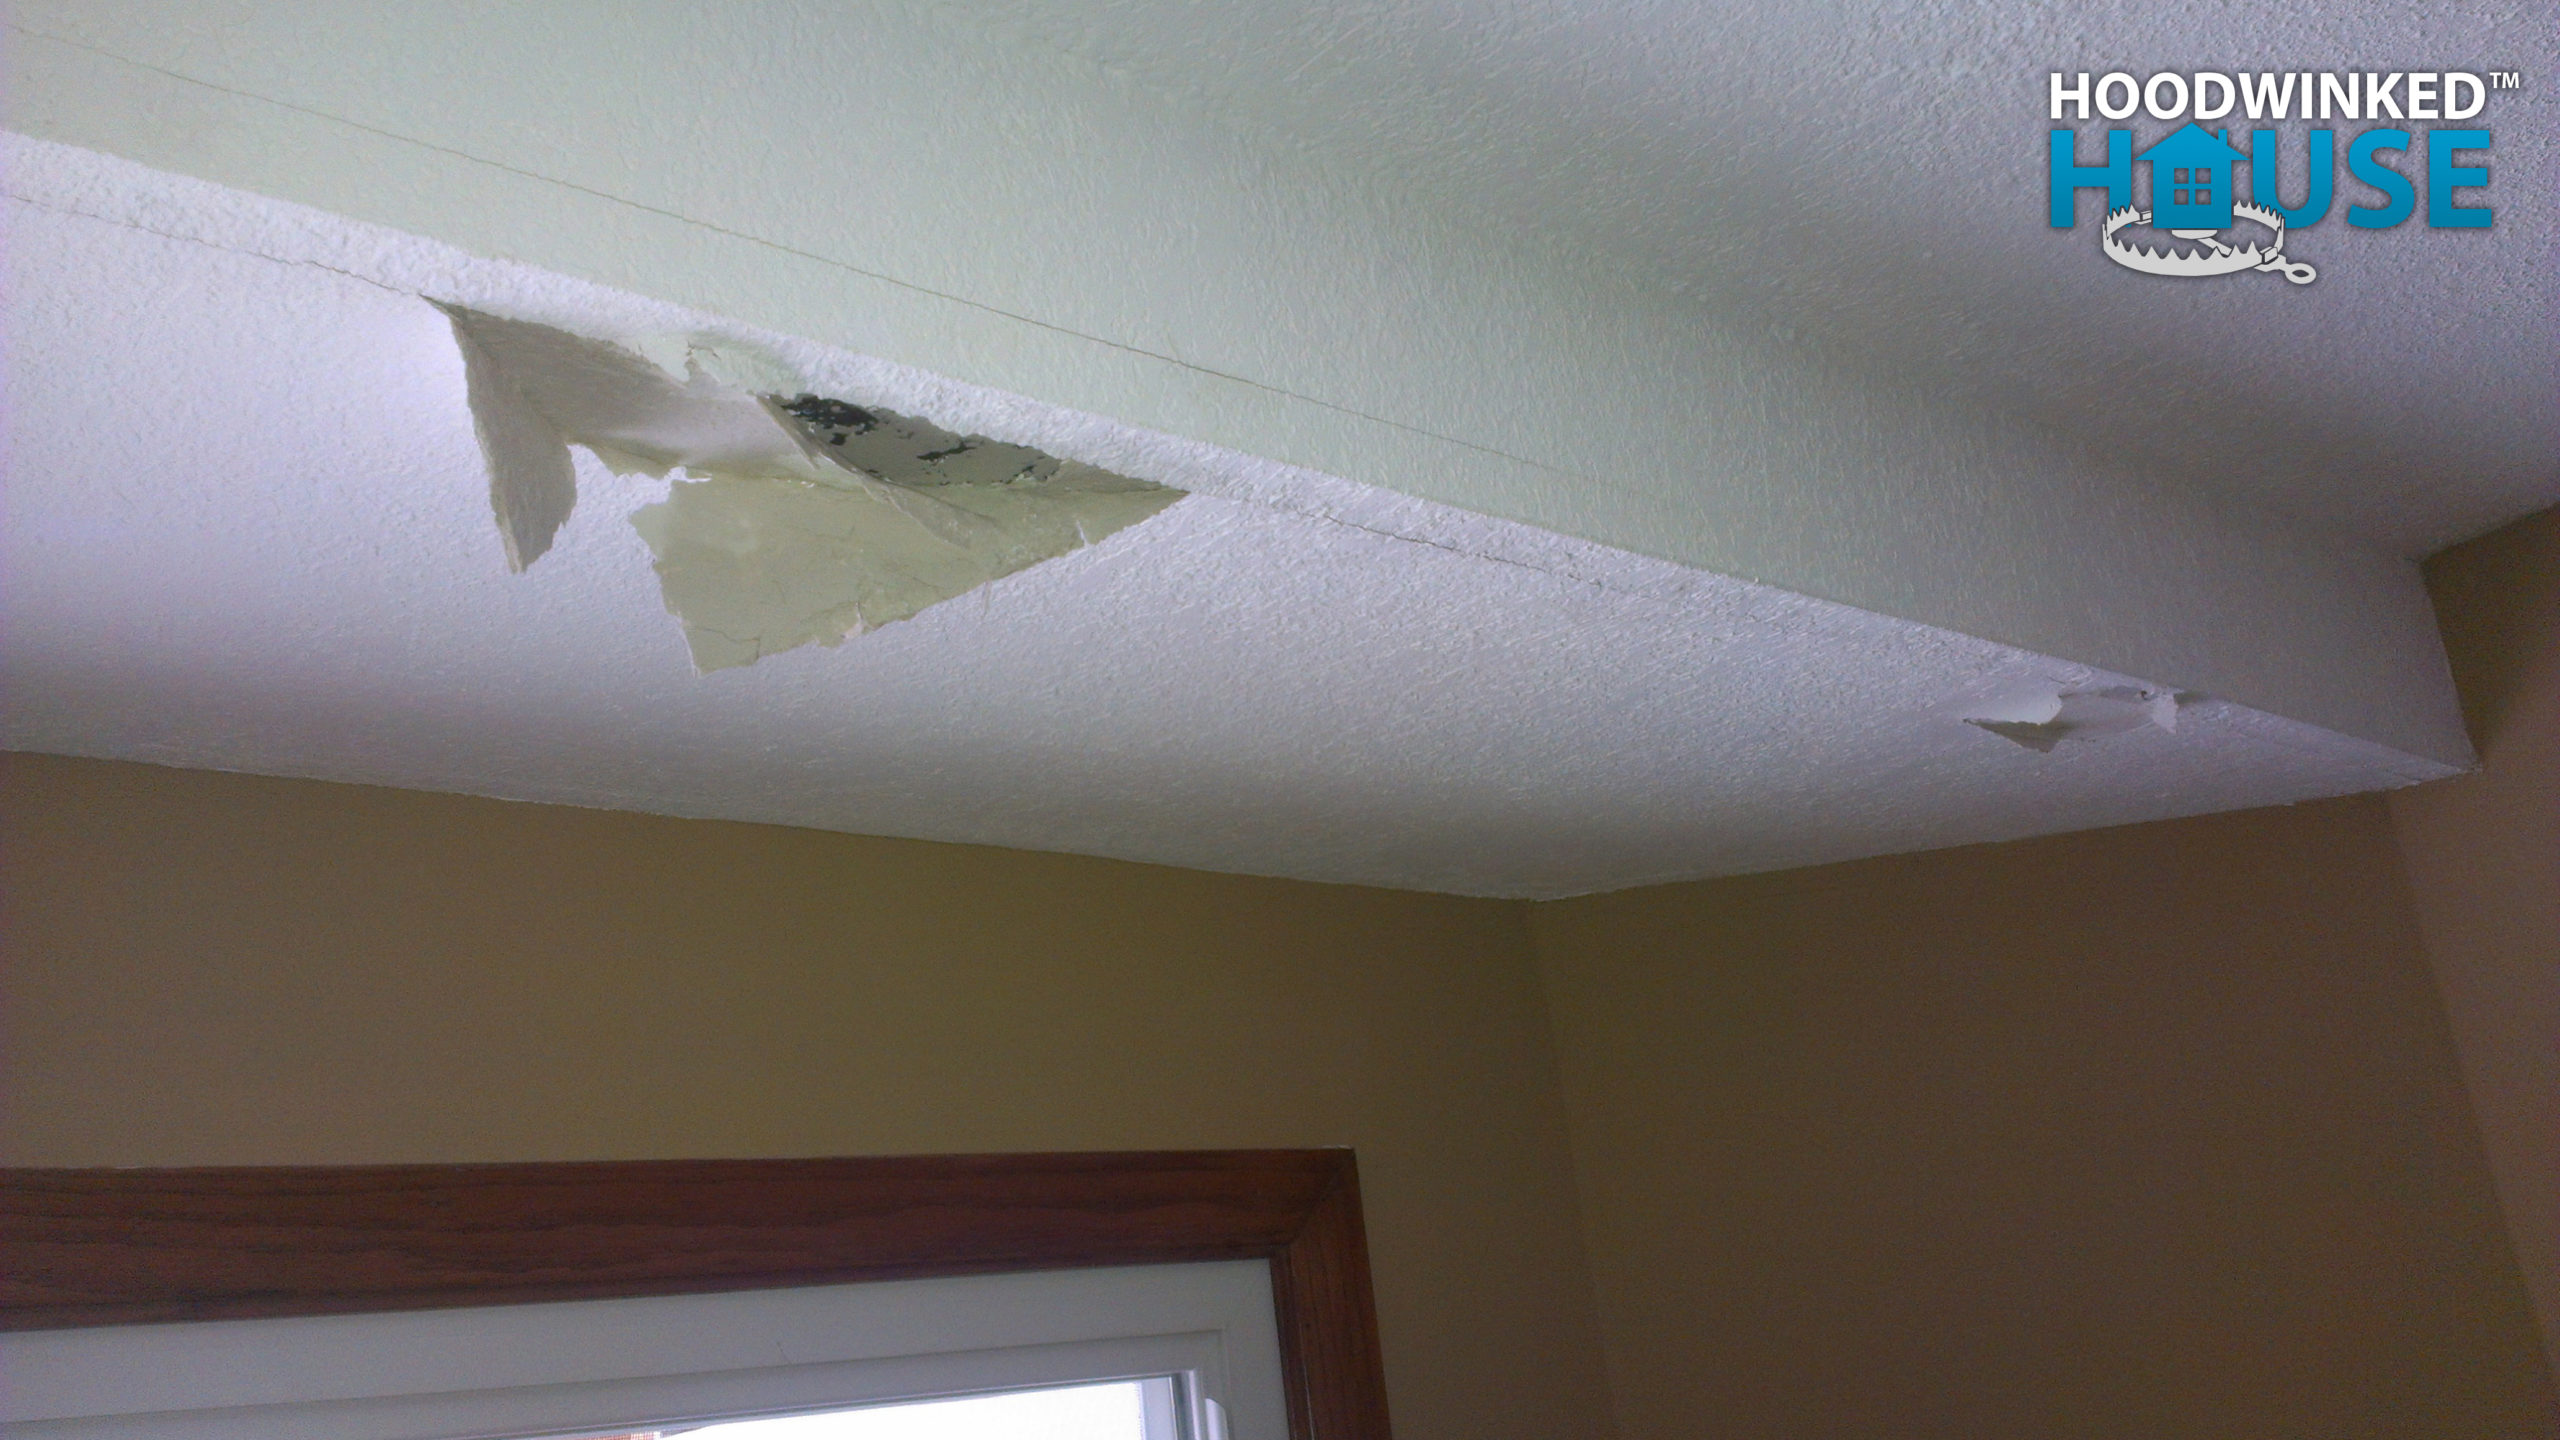 Ice dams on the roof push their way inside the house, causing damage to the ceiling drywall in this eve soffit.